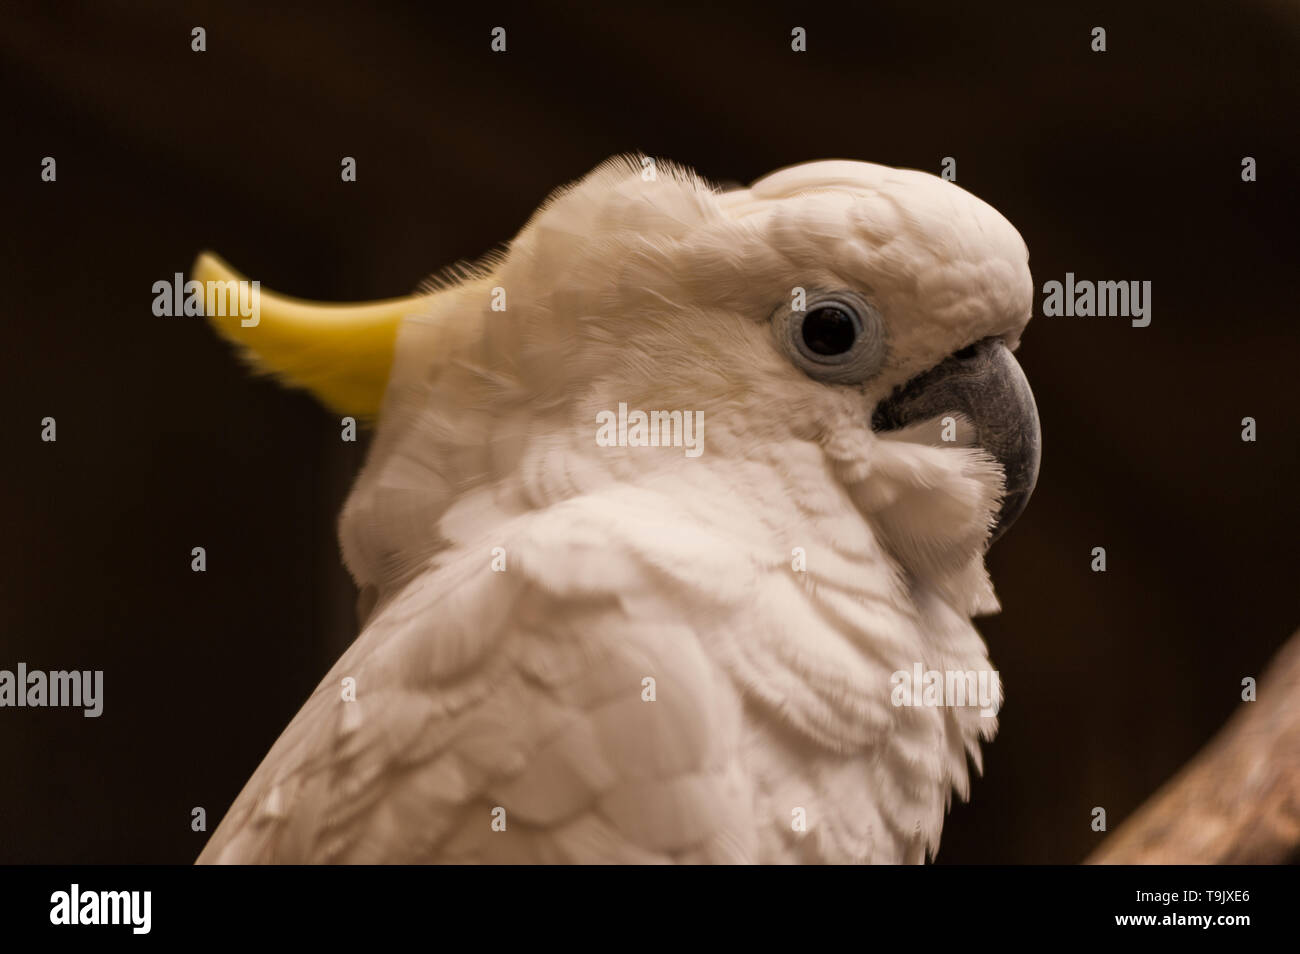 Close up portrait of a sulphur-crested cockatoo (Cacatua galerita of the family of Cacatuidae) sitting on a branch with details in white plumage Stock Photo